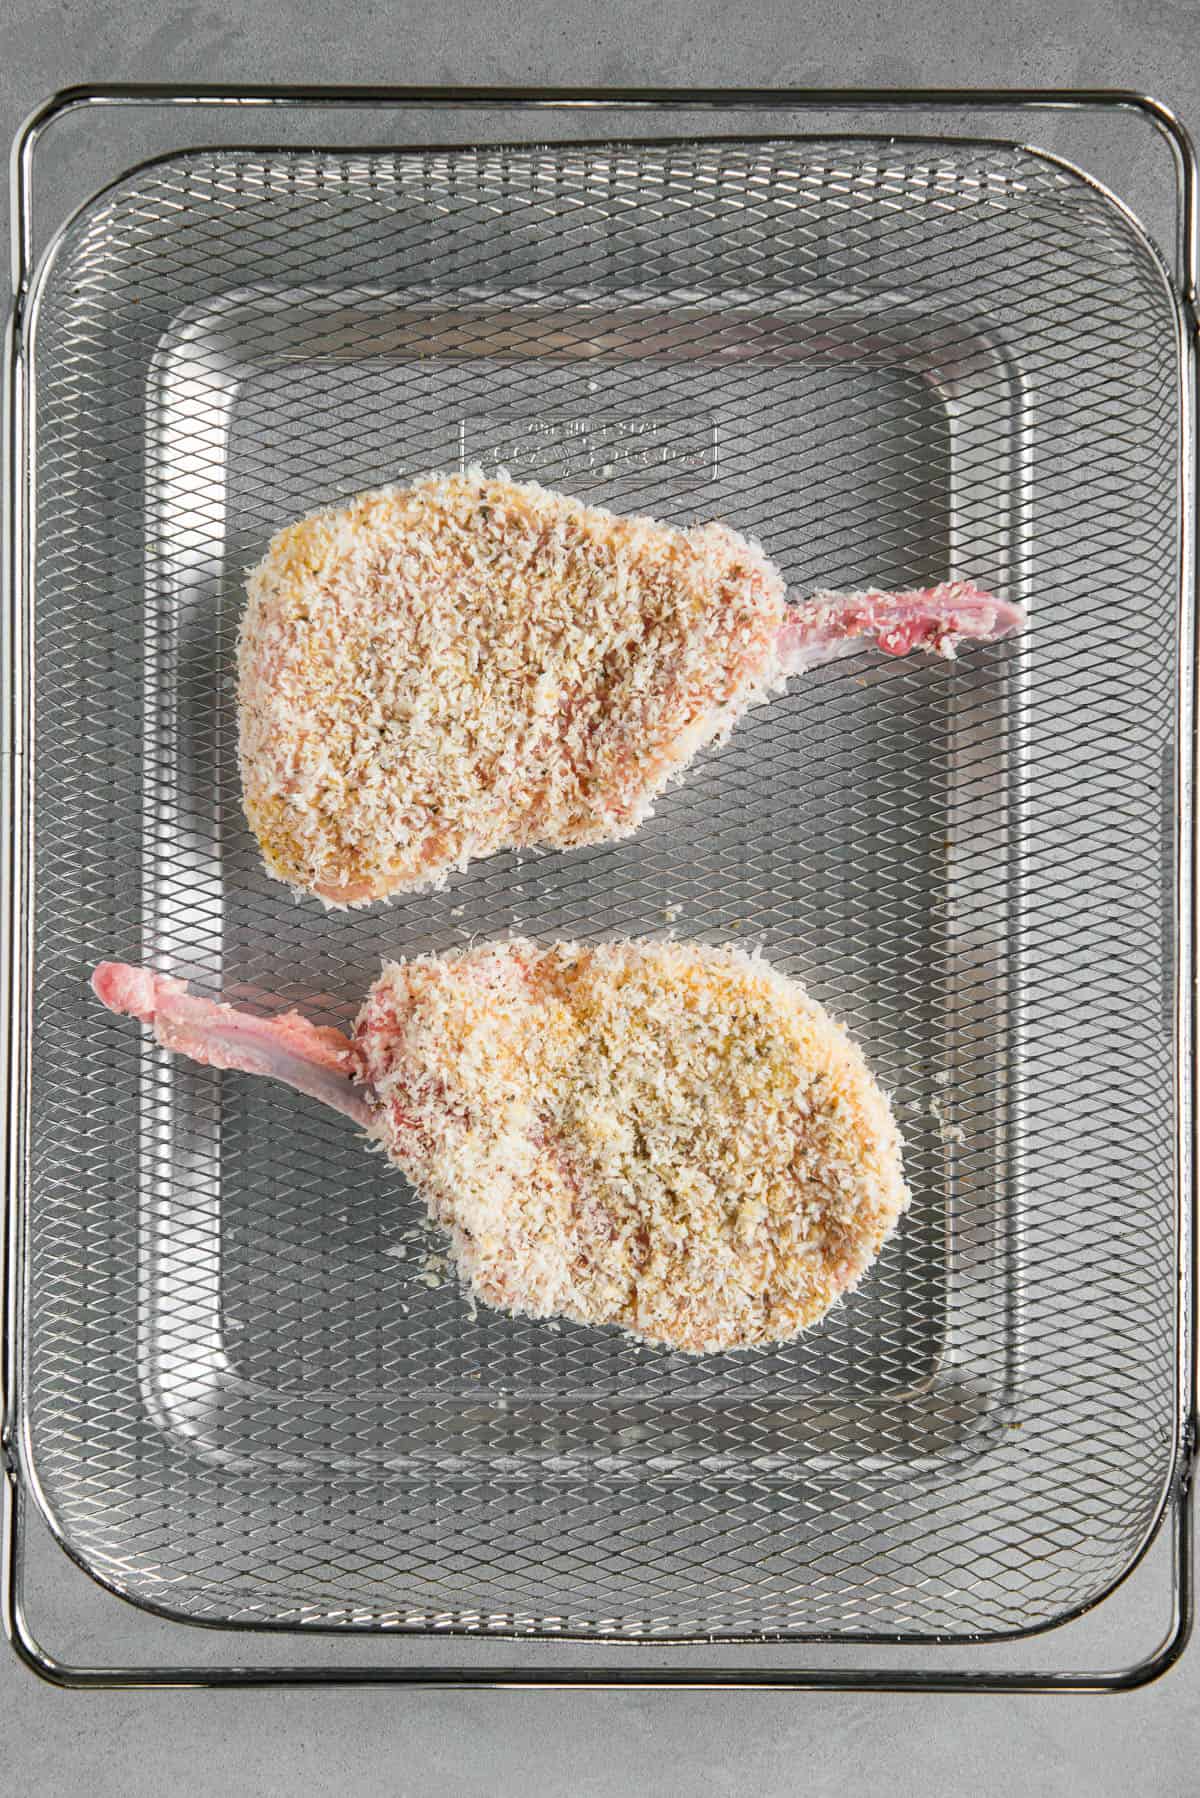 two breaded pork chops in air fryer basket prior to cooking